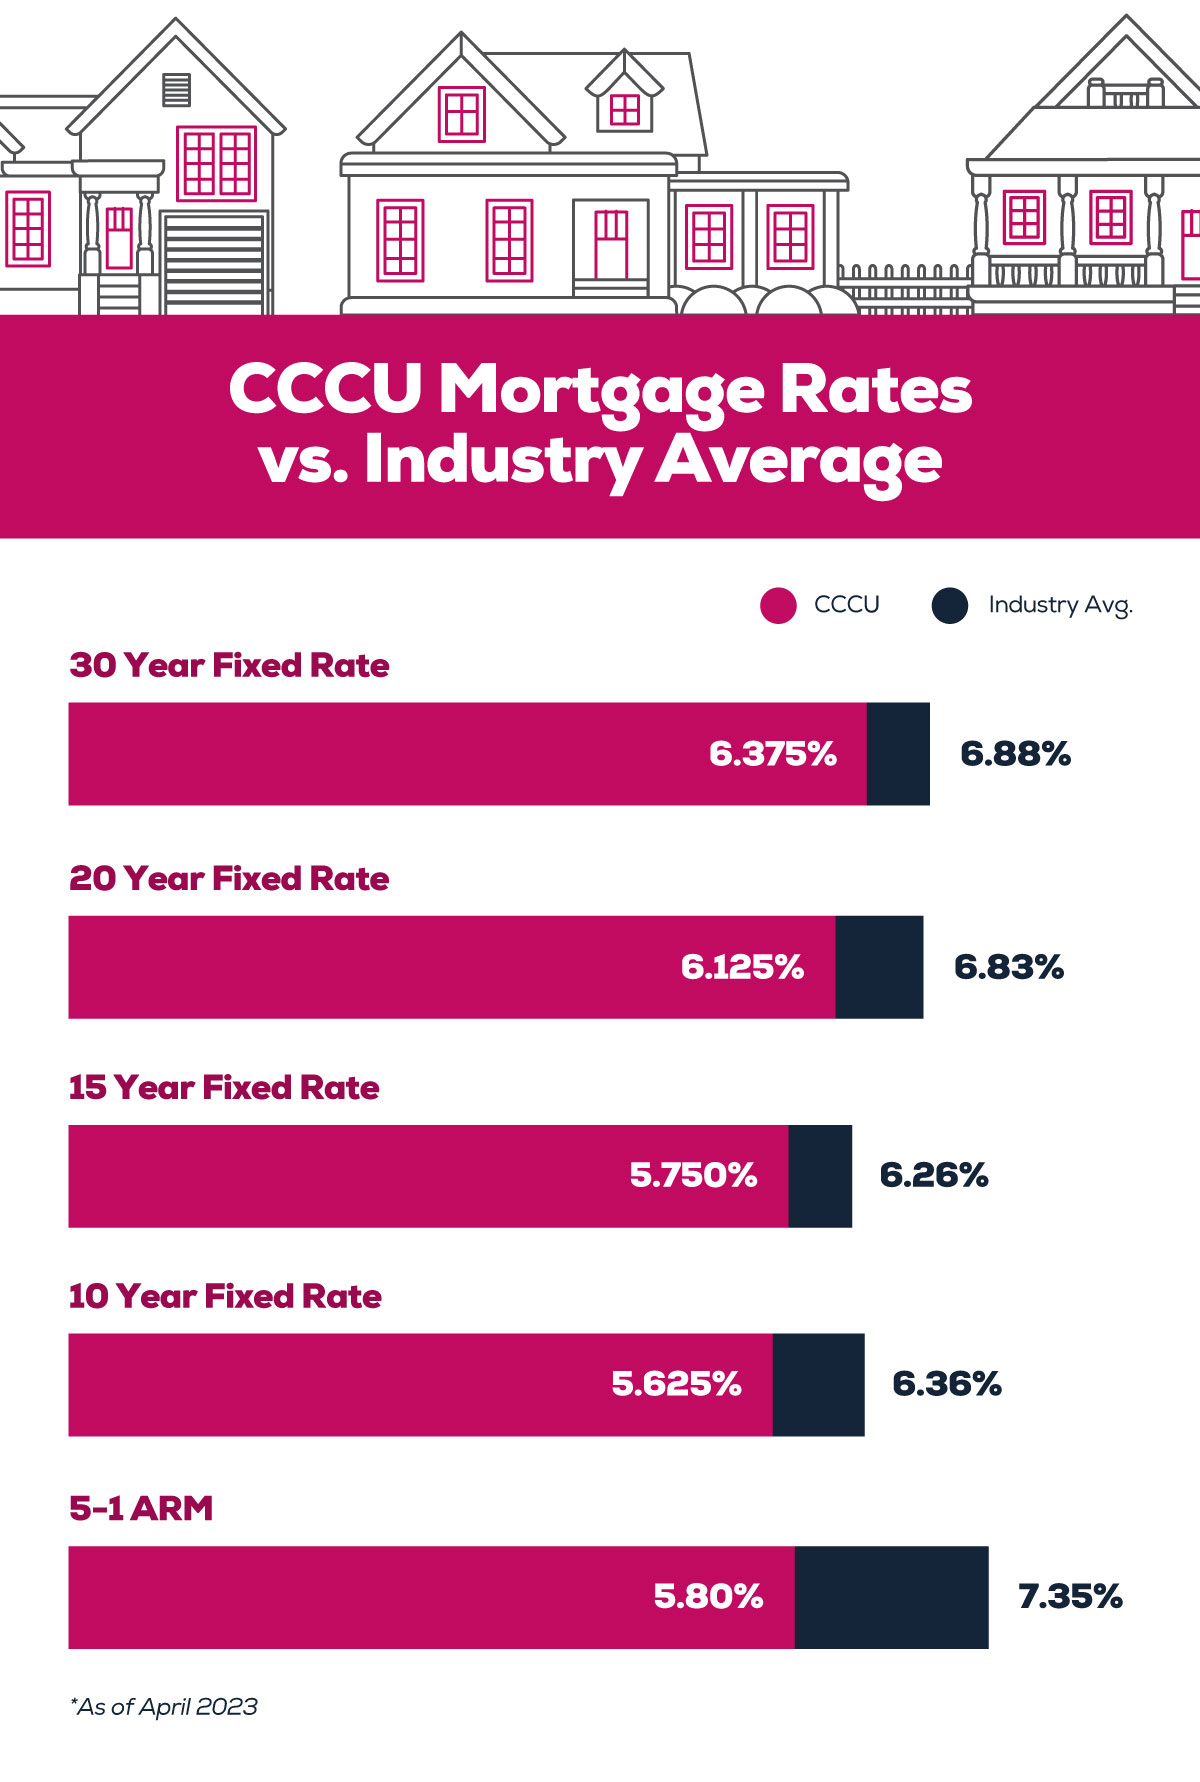 CCCU Mortgage Rates vs industry average infographic